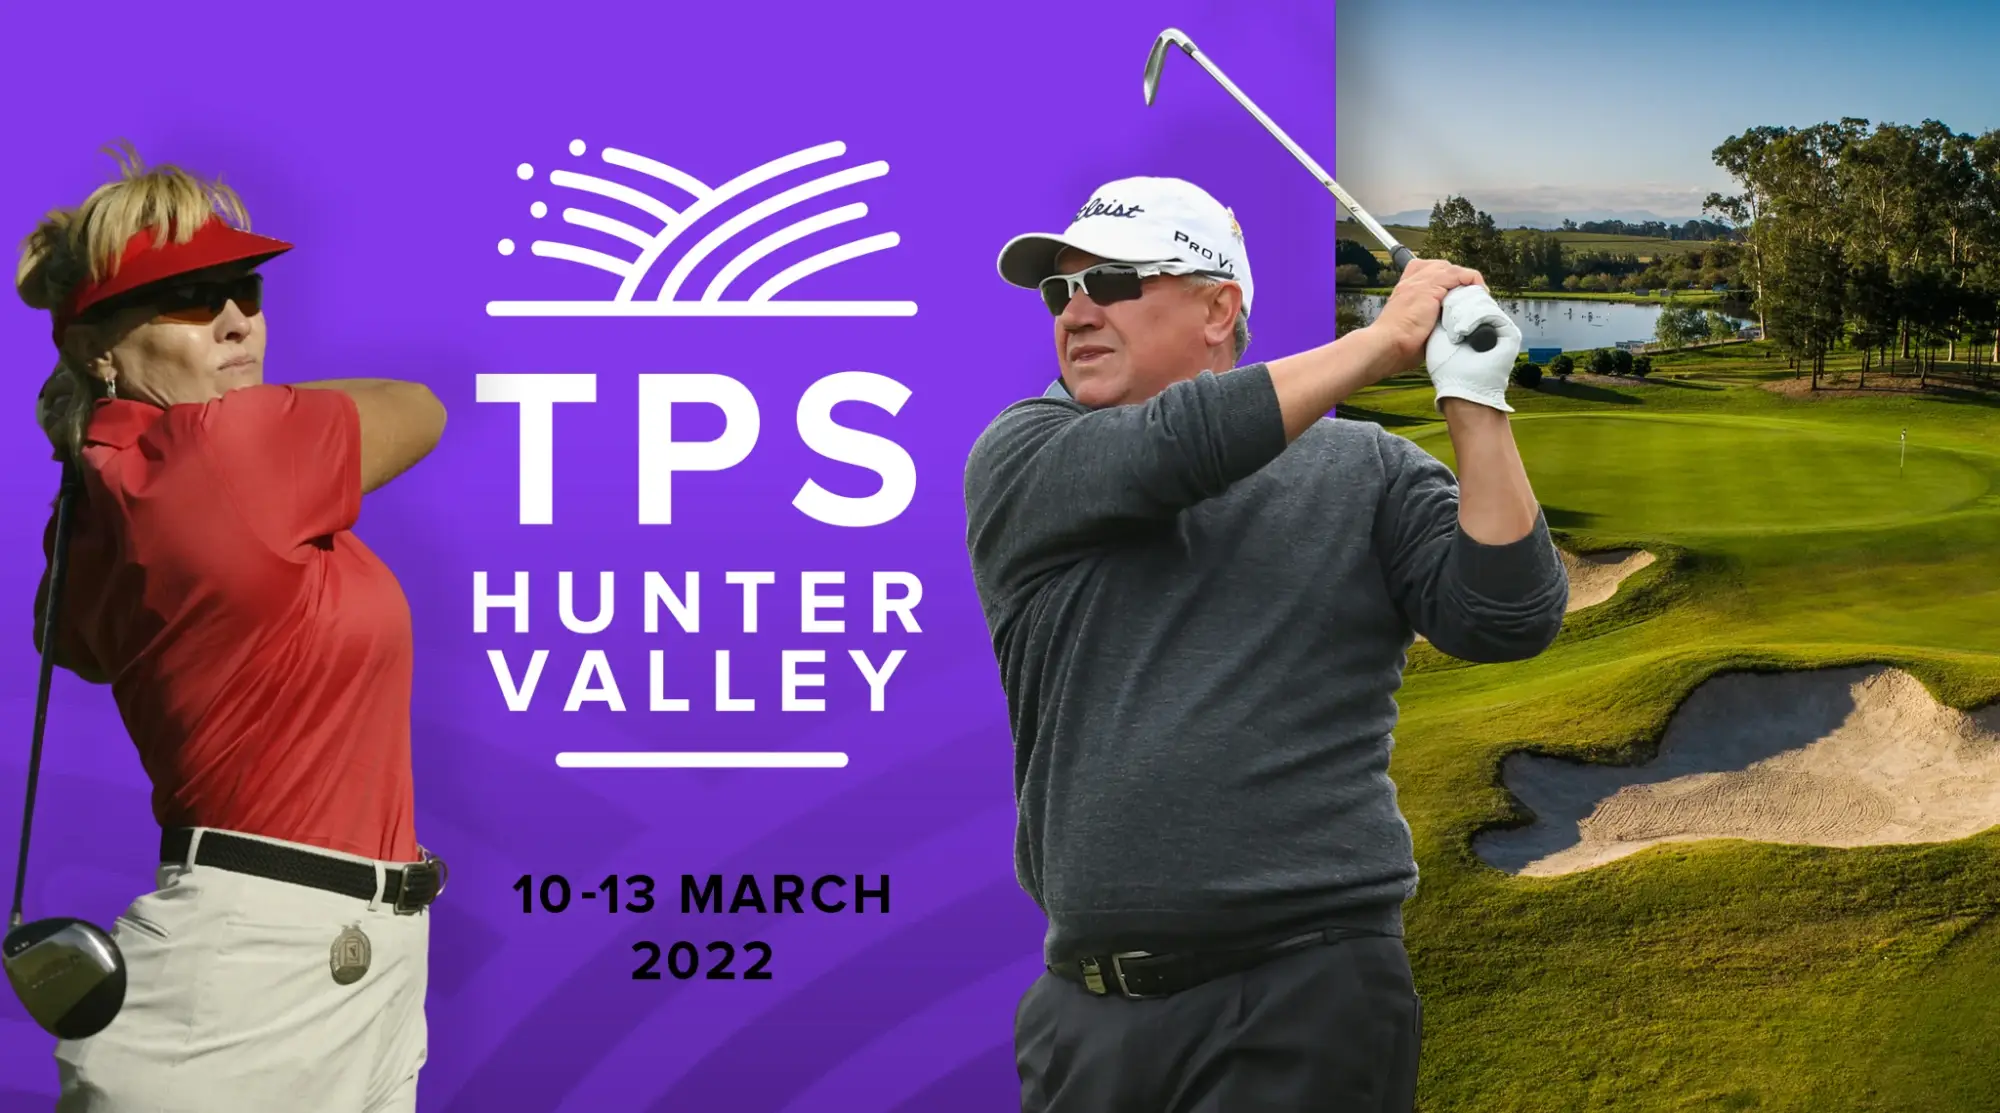 TPS Hunter Valley is the newest tournament in the Webex Players Series.